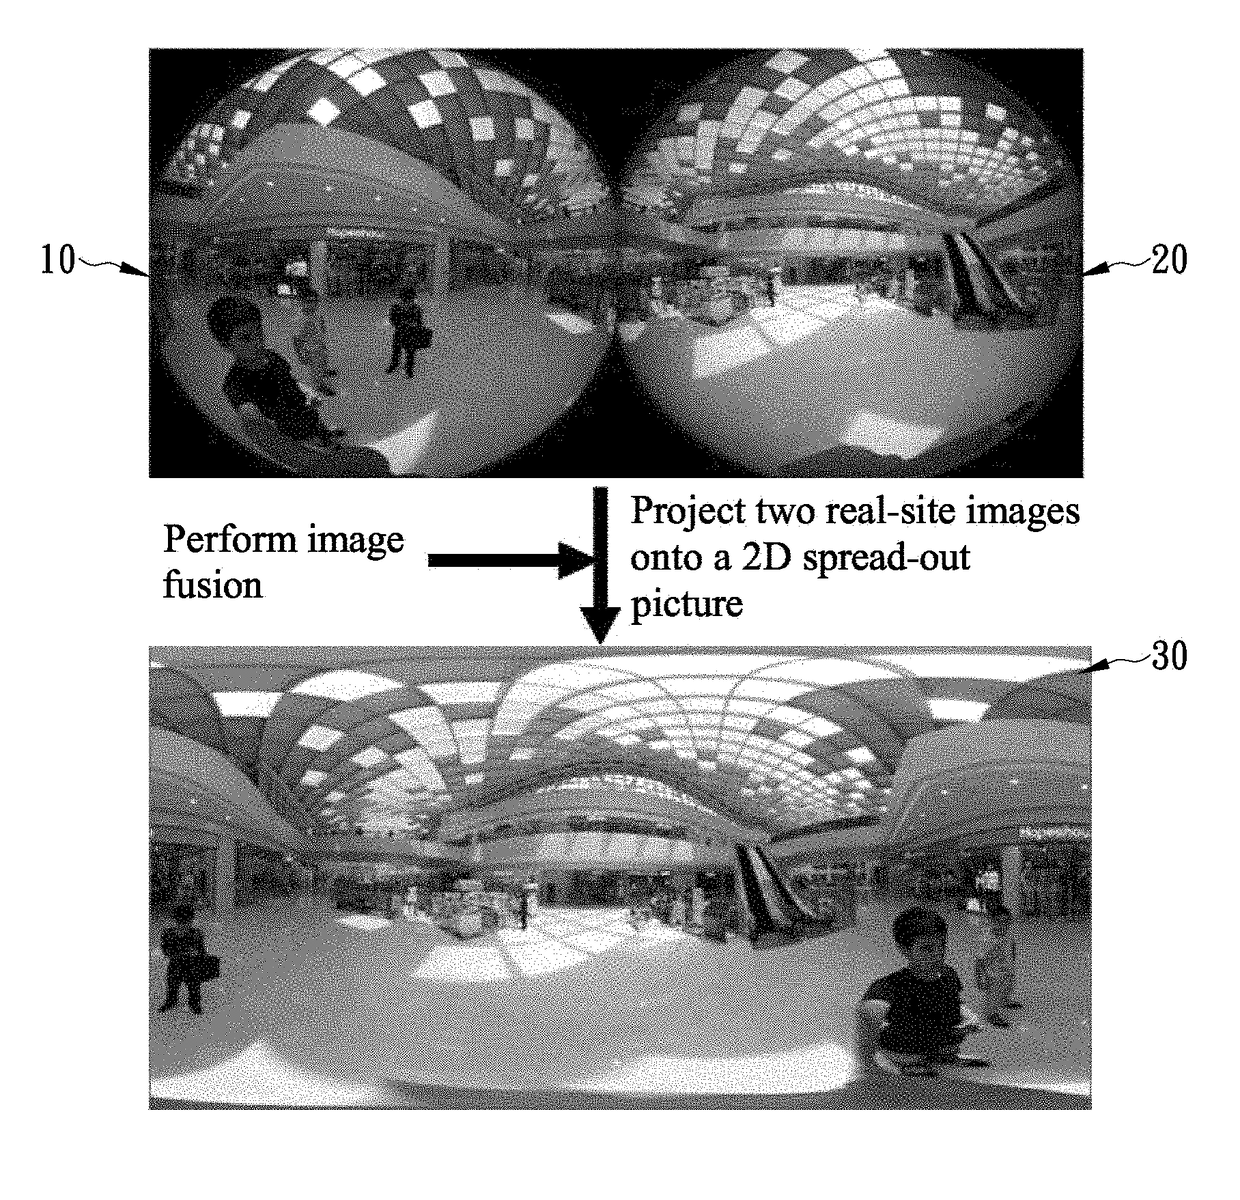 Method for stitching together images taken through fisheye lens in order to produce 360-degree spherical panorama